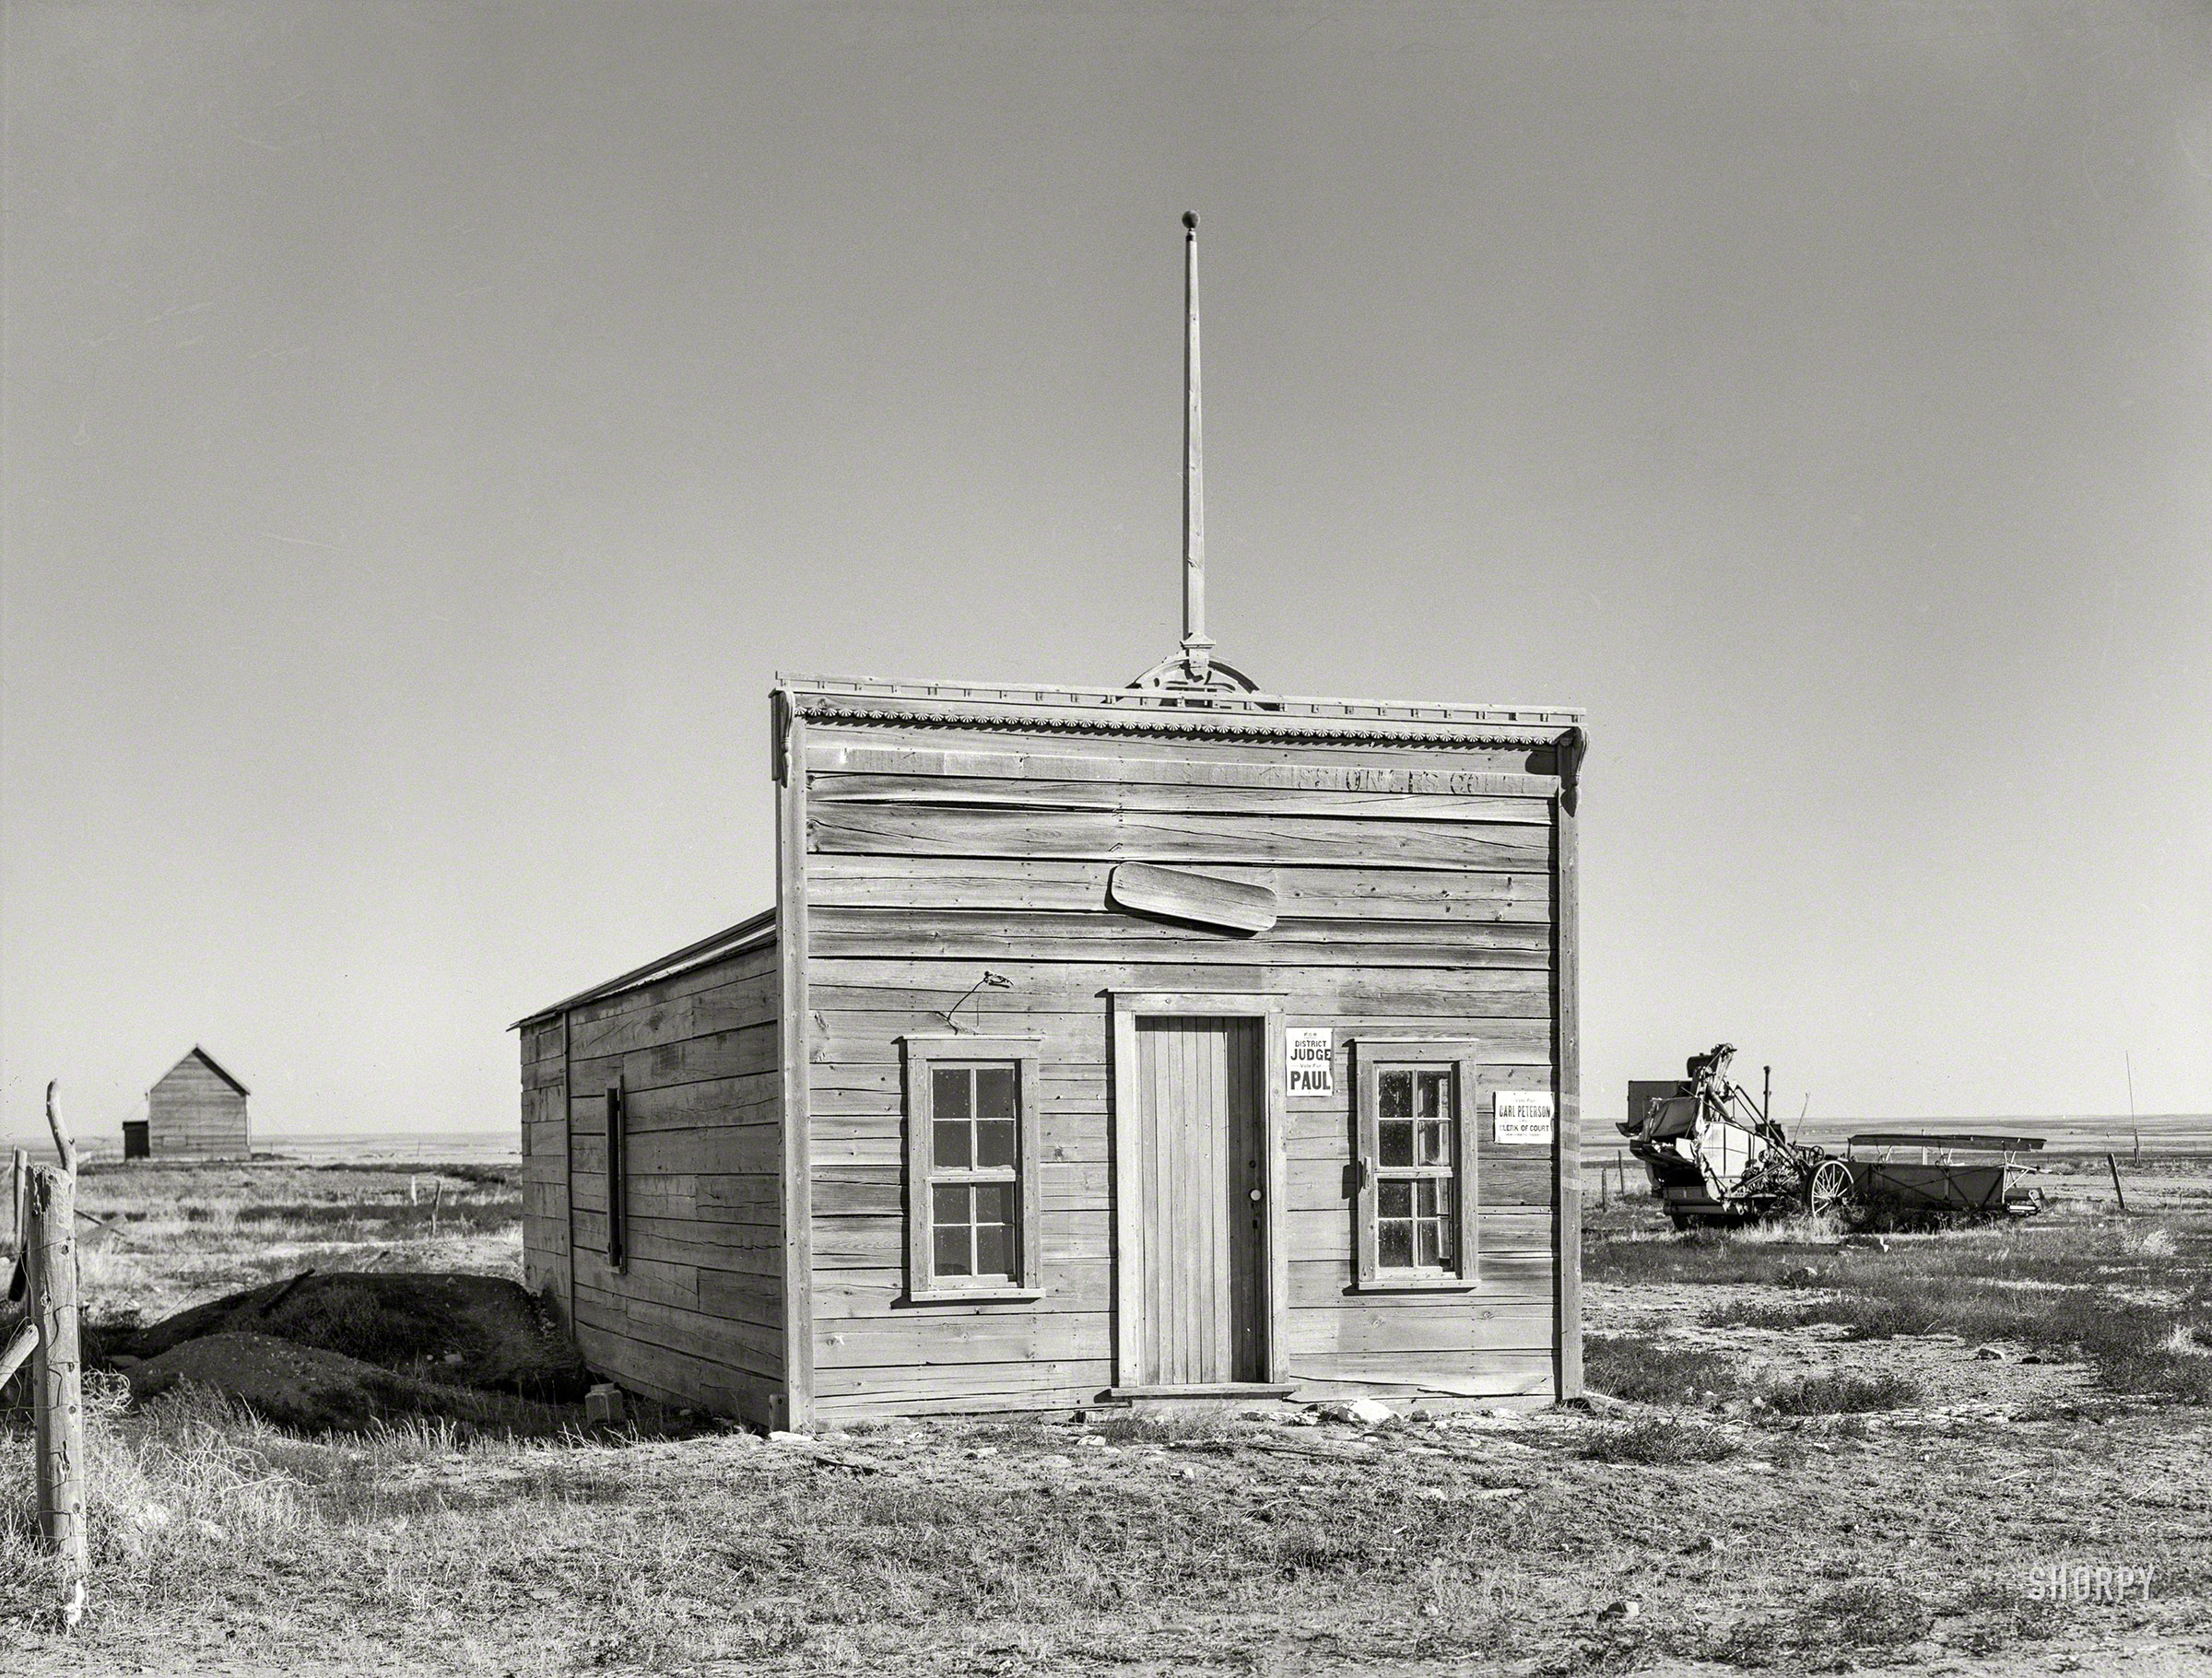 November 1937. "Old justice court and U.S. Commissioners court in Dagmar. Sheridan County, Montana." Medium format acetate negative by Russell Lee for the Farm Security Administration. View full size.